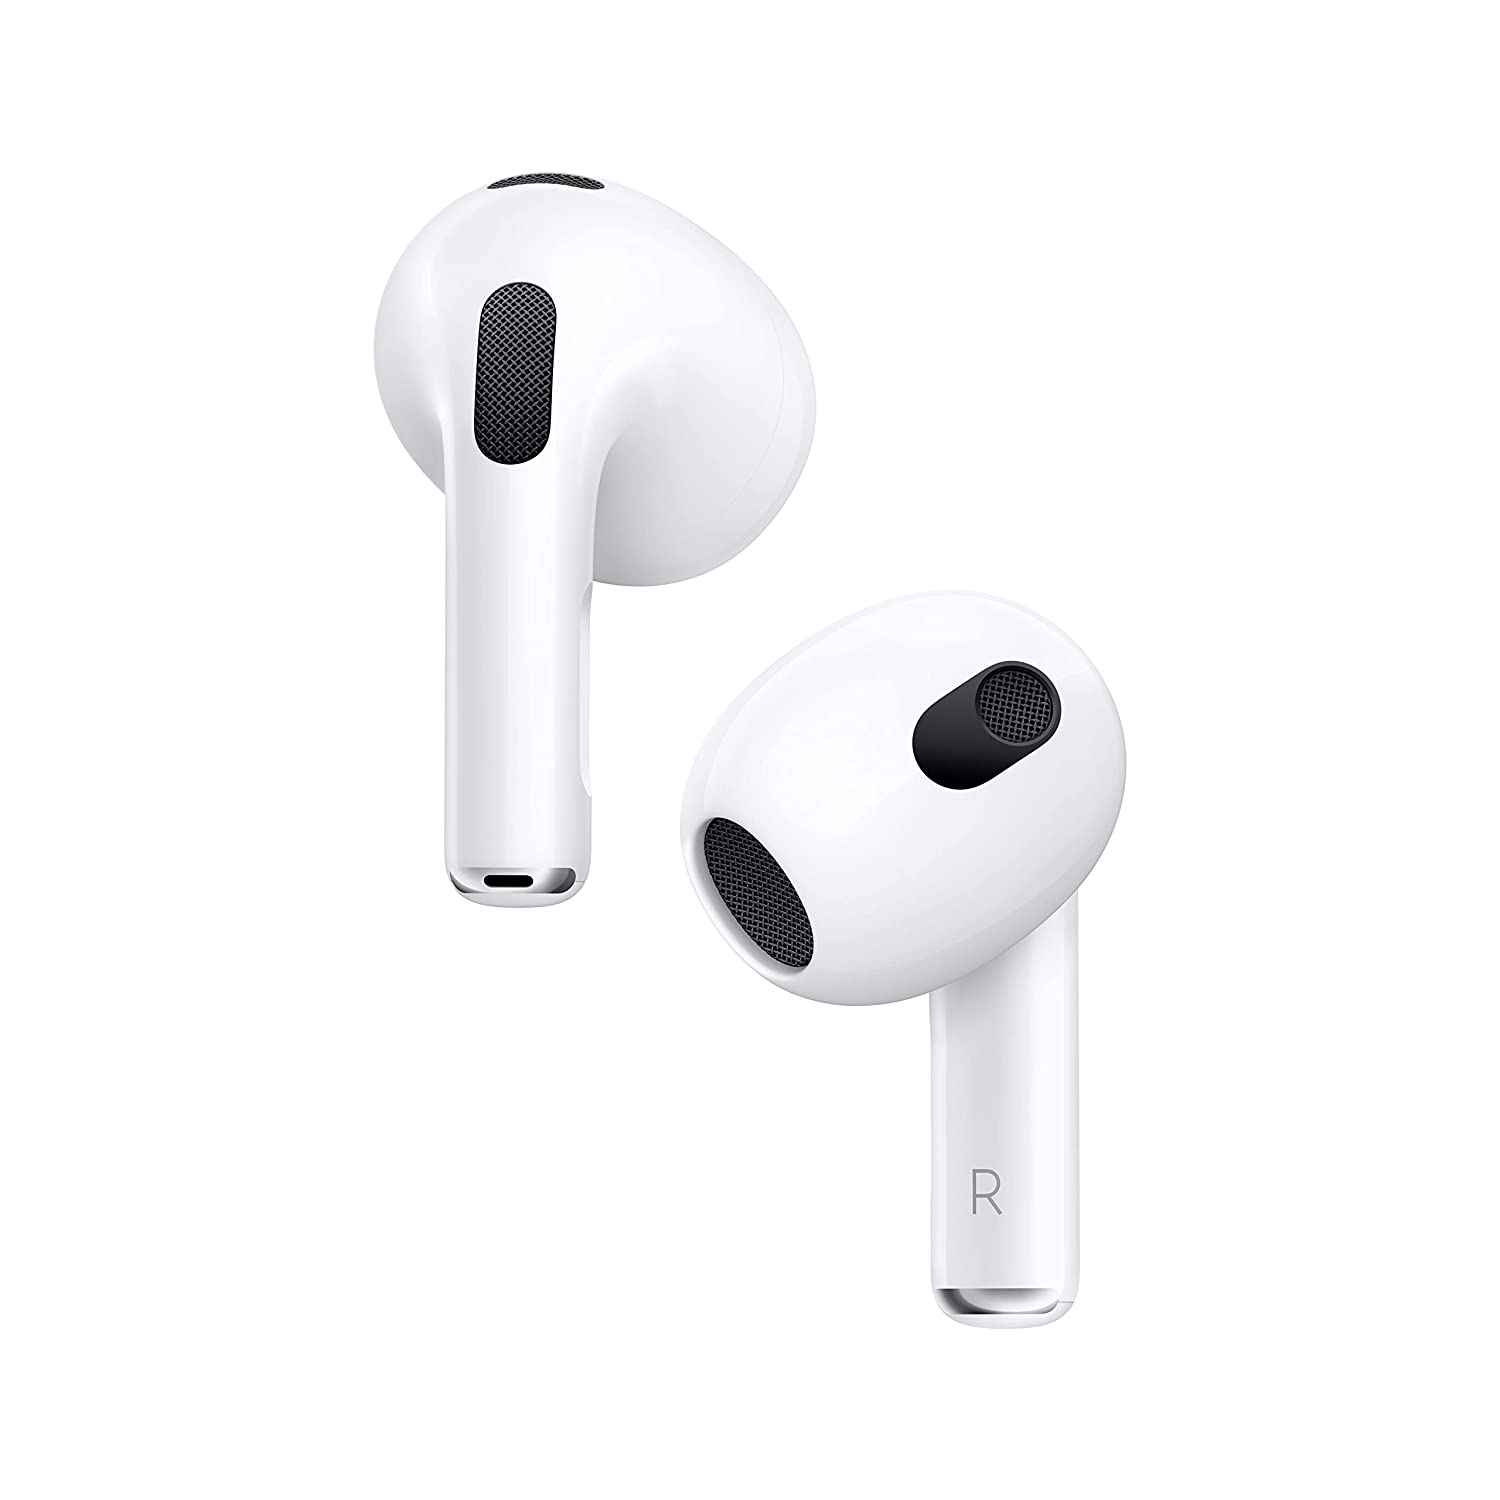 The Apple AirPods 3 is available for Rs 2,000 on Amazon, but something has been caught